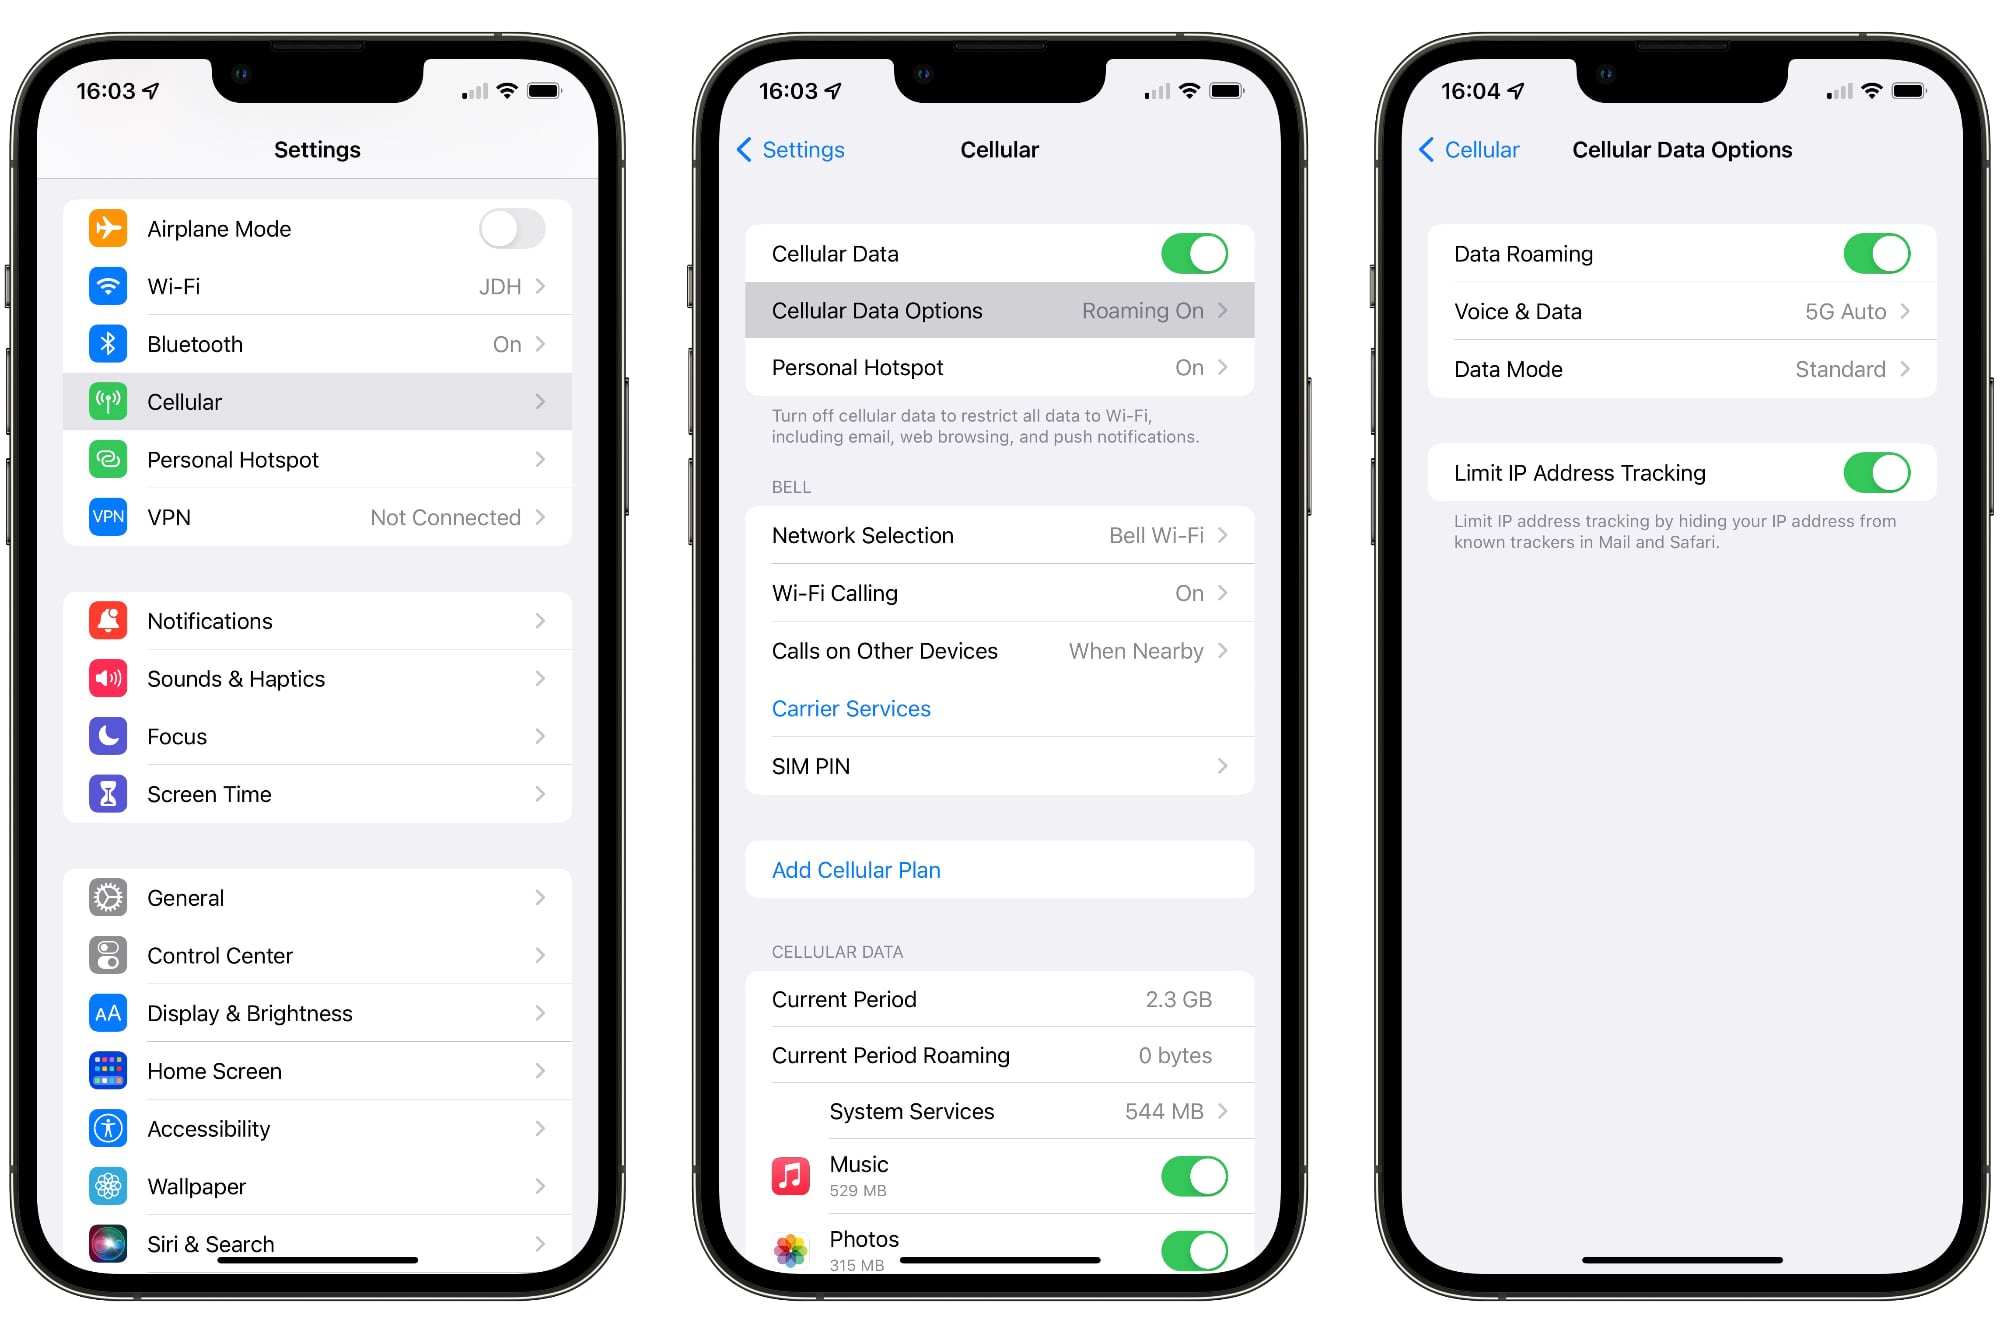 Network Switch: Changing From 5G To LTE On IPhone 13